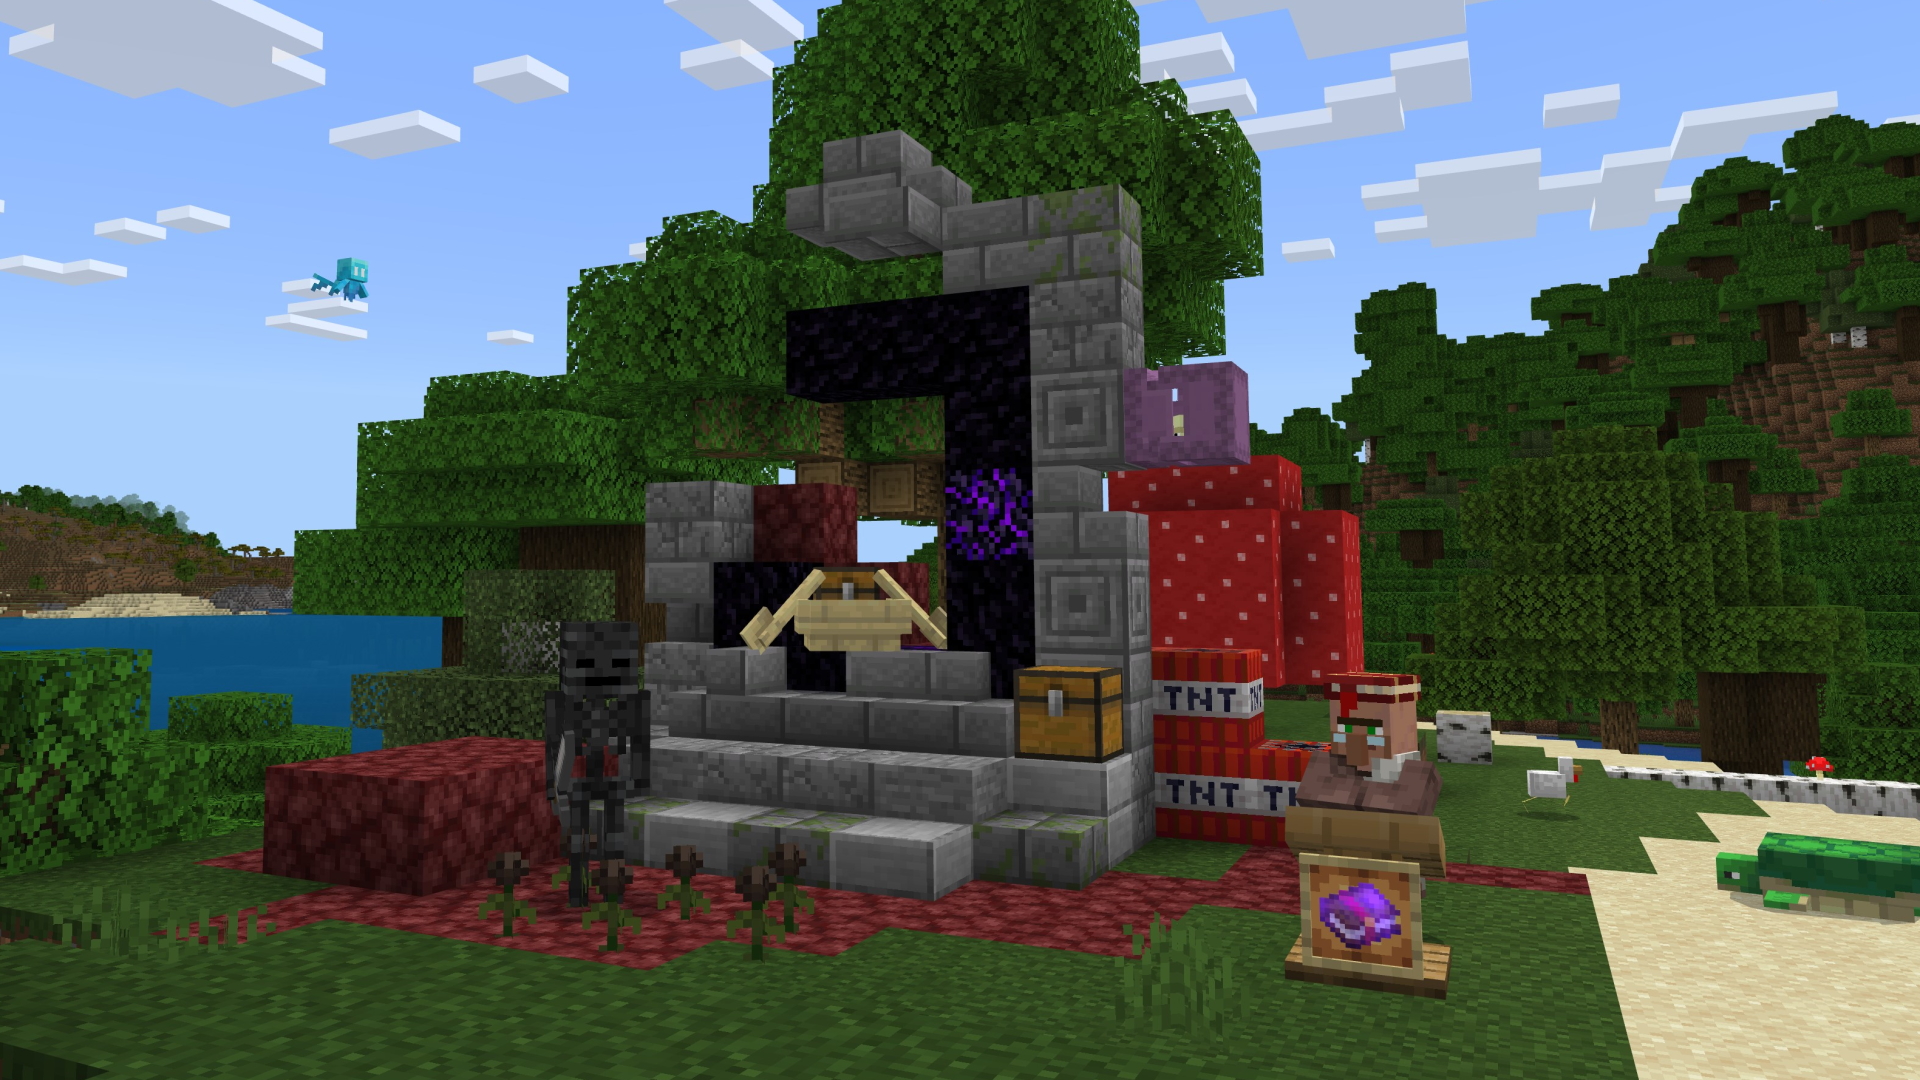 A Minecraft screenshot related to the fixes in this week's preview, with nether portal ruins, a wither skeleton, a villager, and various other mobs in the scene.